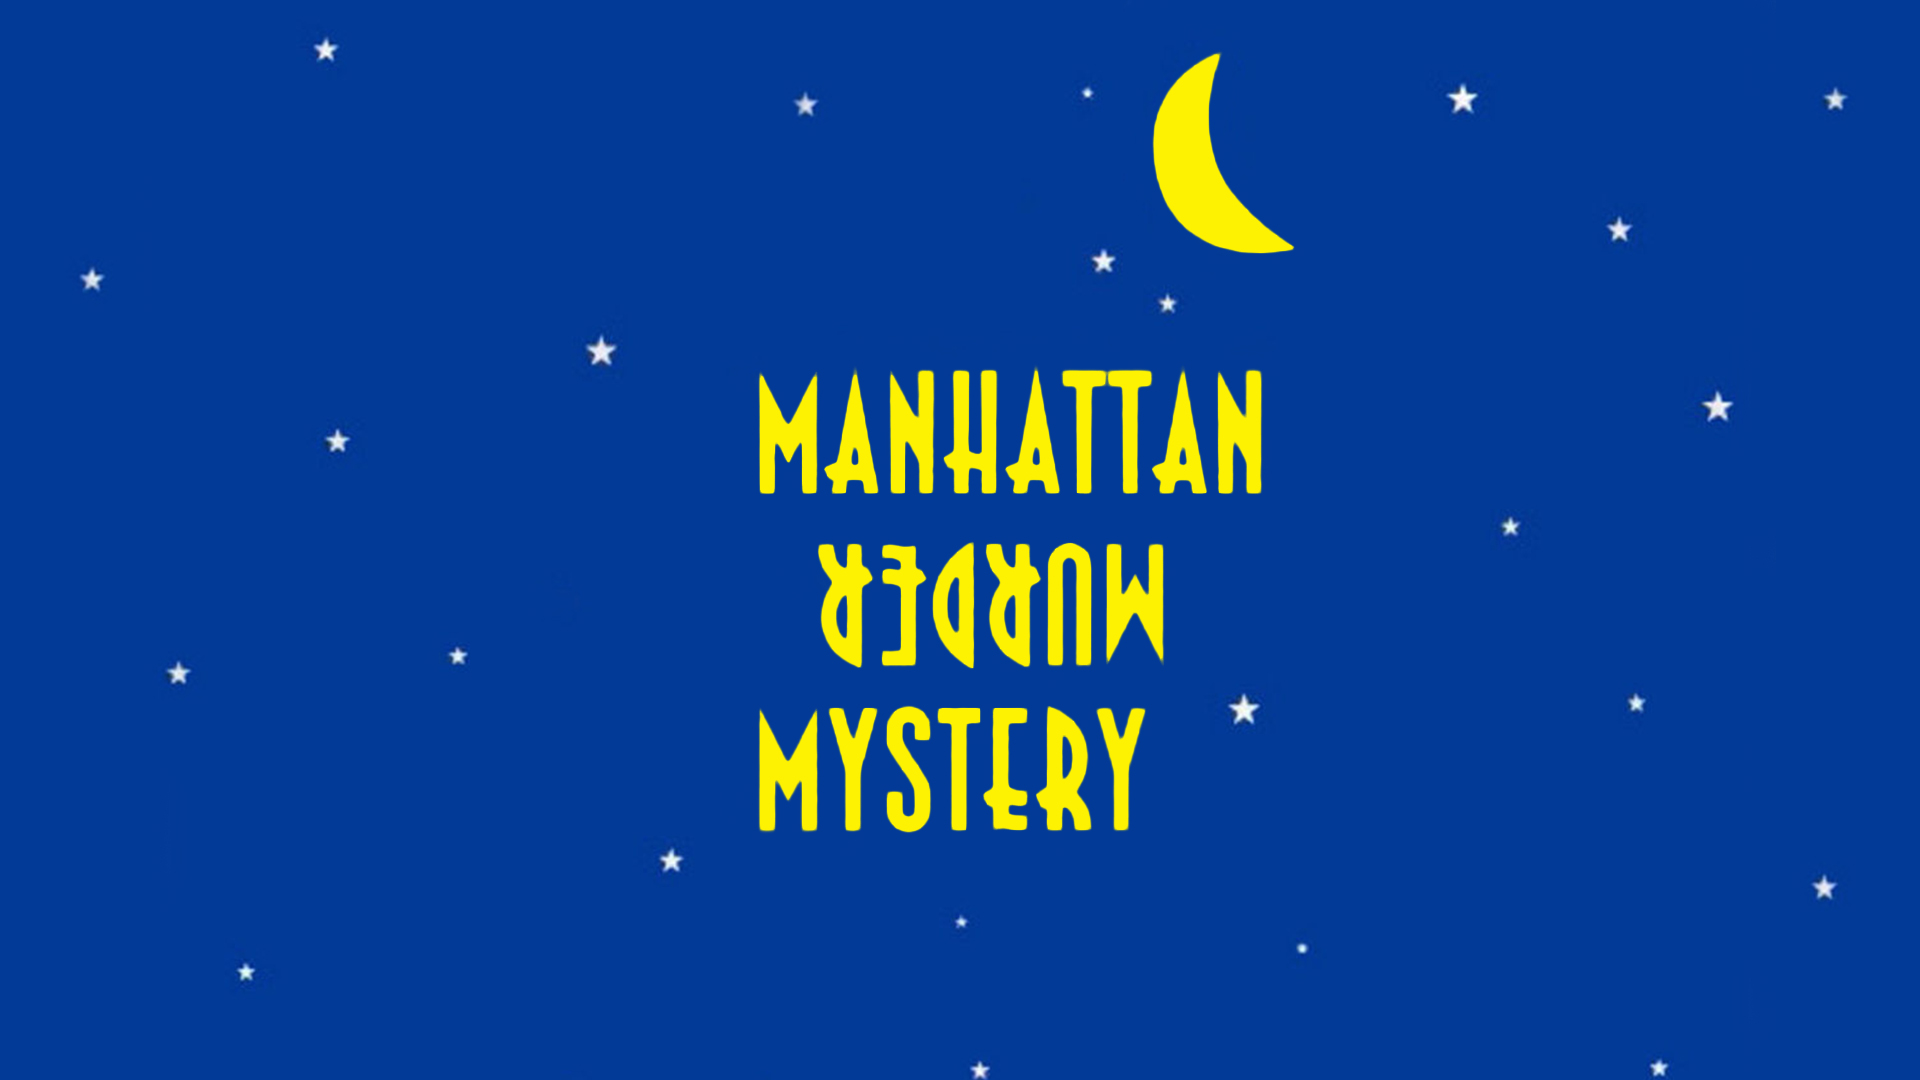 35-facts-about-the-movie-manhattan-murder-mystery